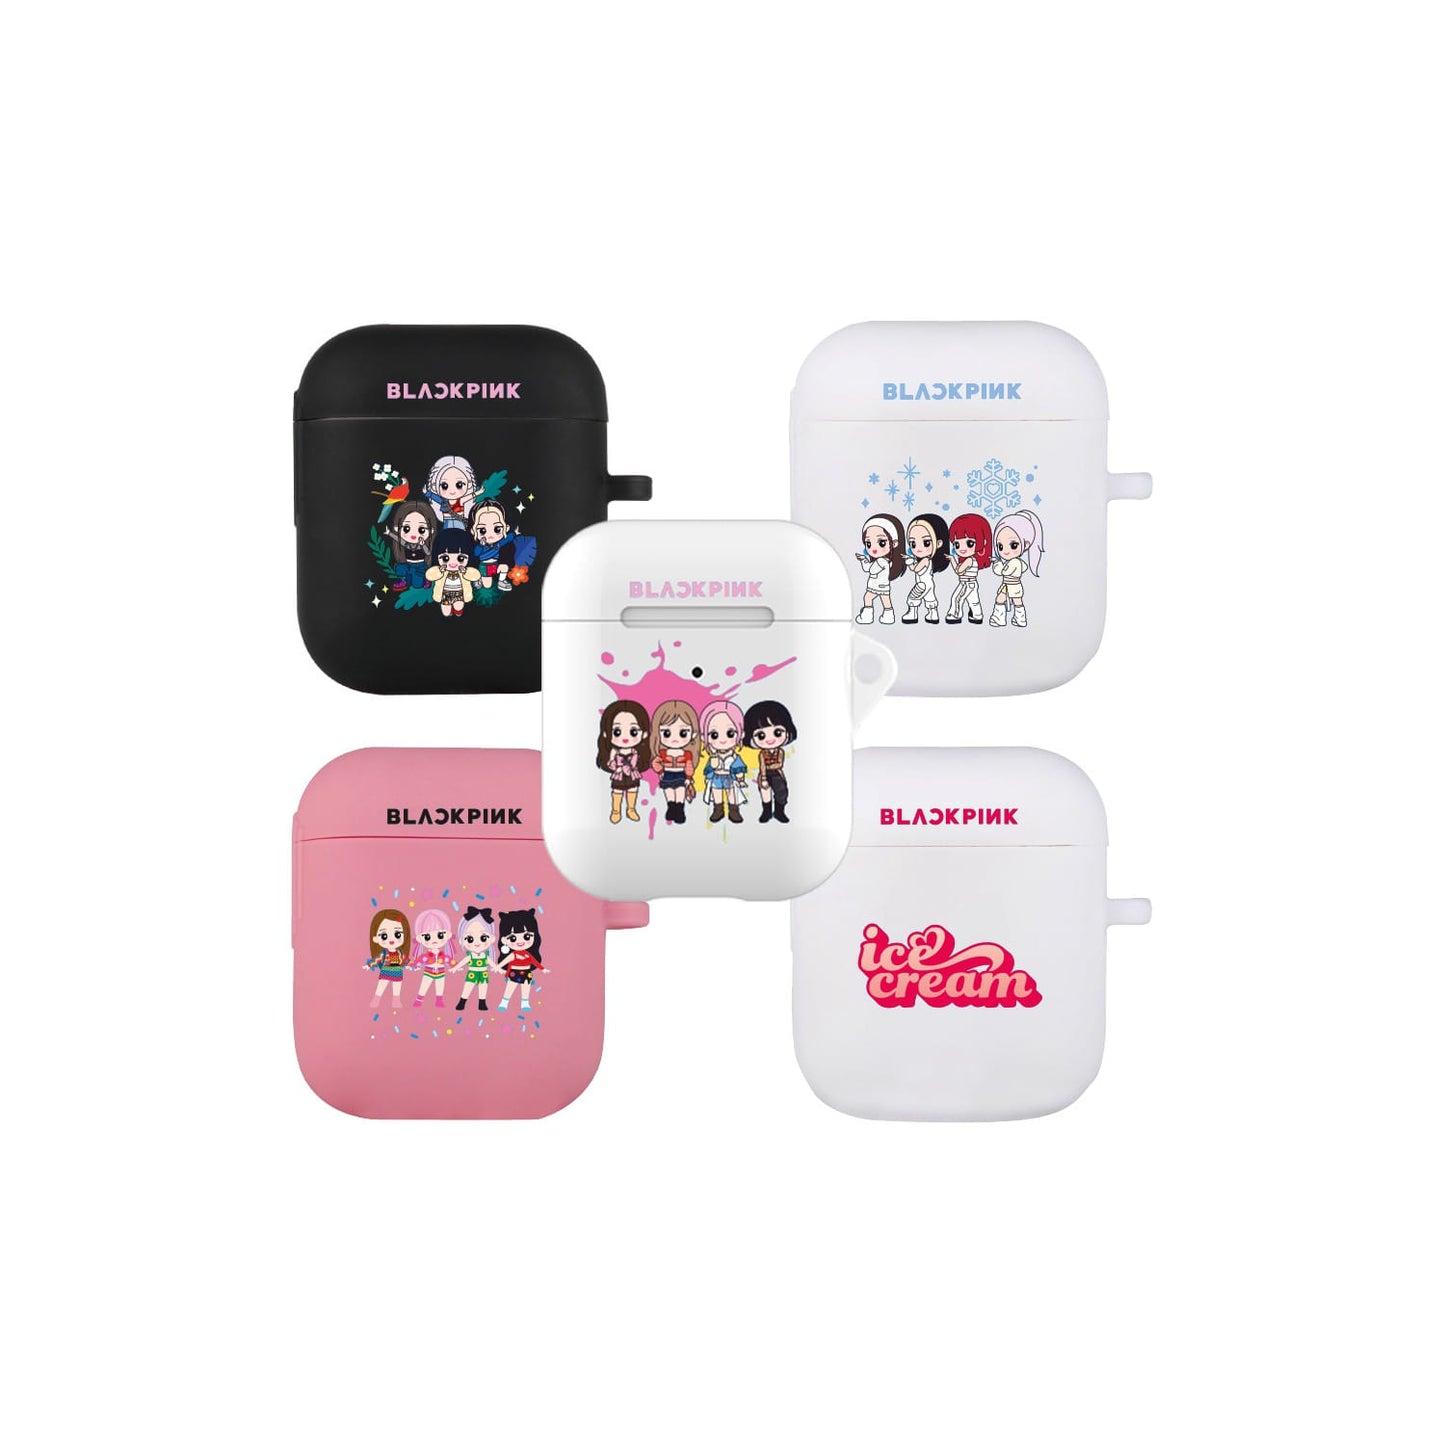 BLACKPINK THE SHOW AirPods Case